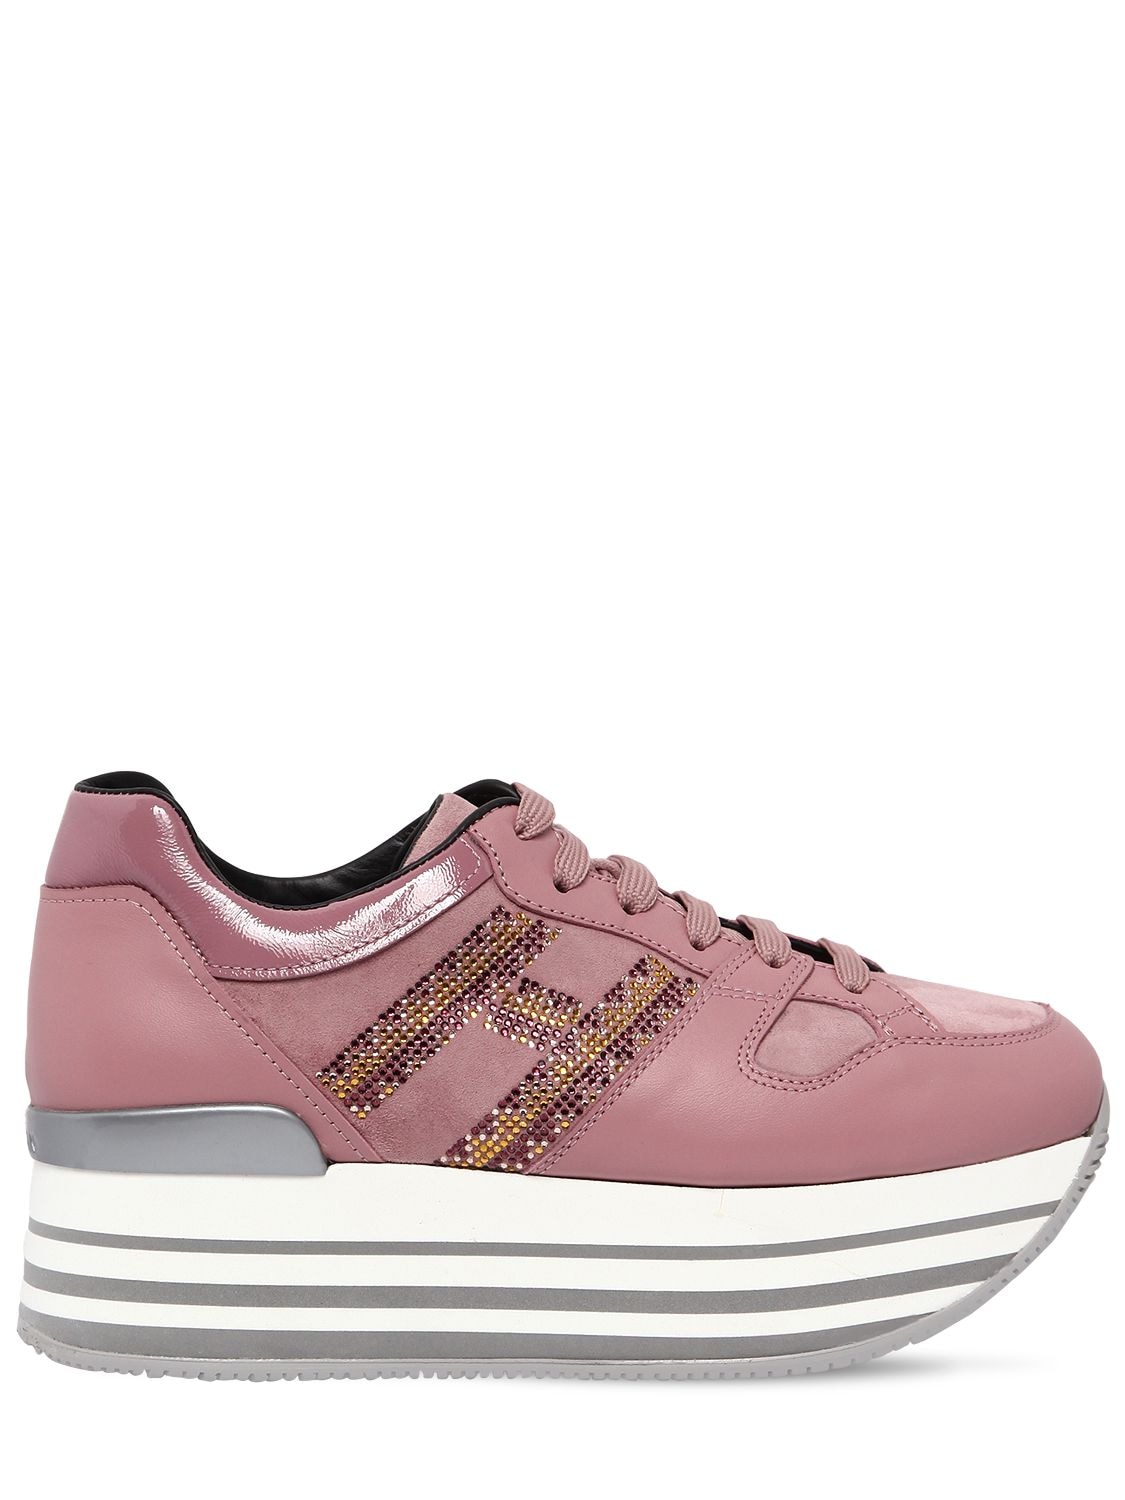 Hogan 70mm Maxi 222 Leather Sneakers In Pink